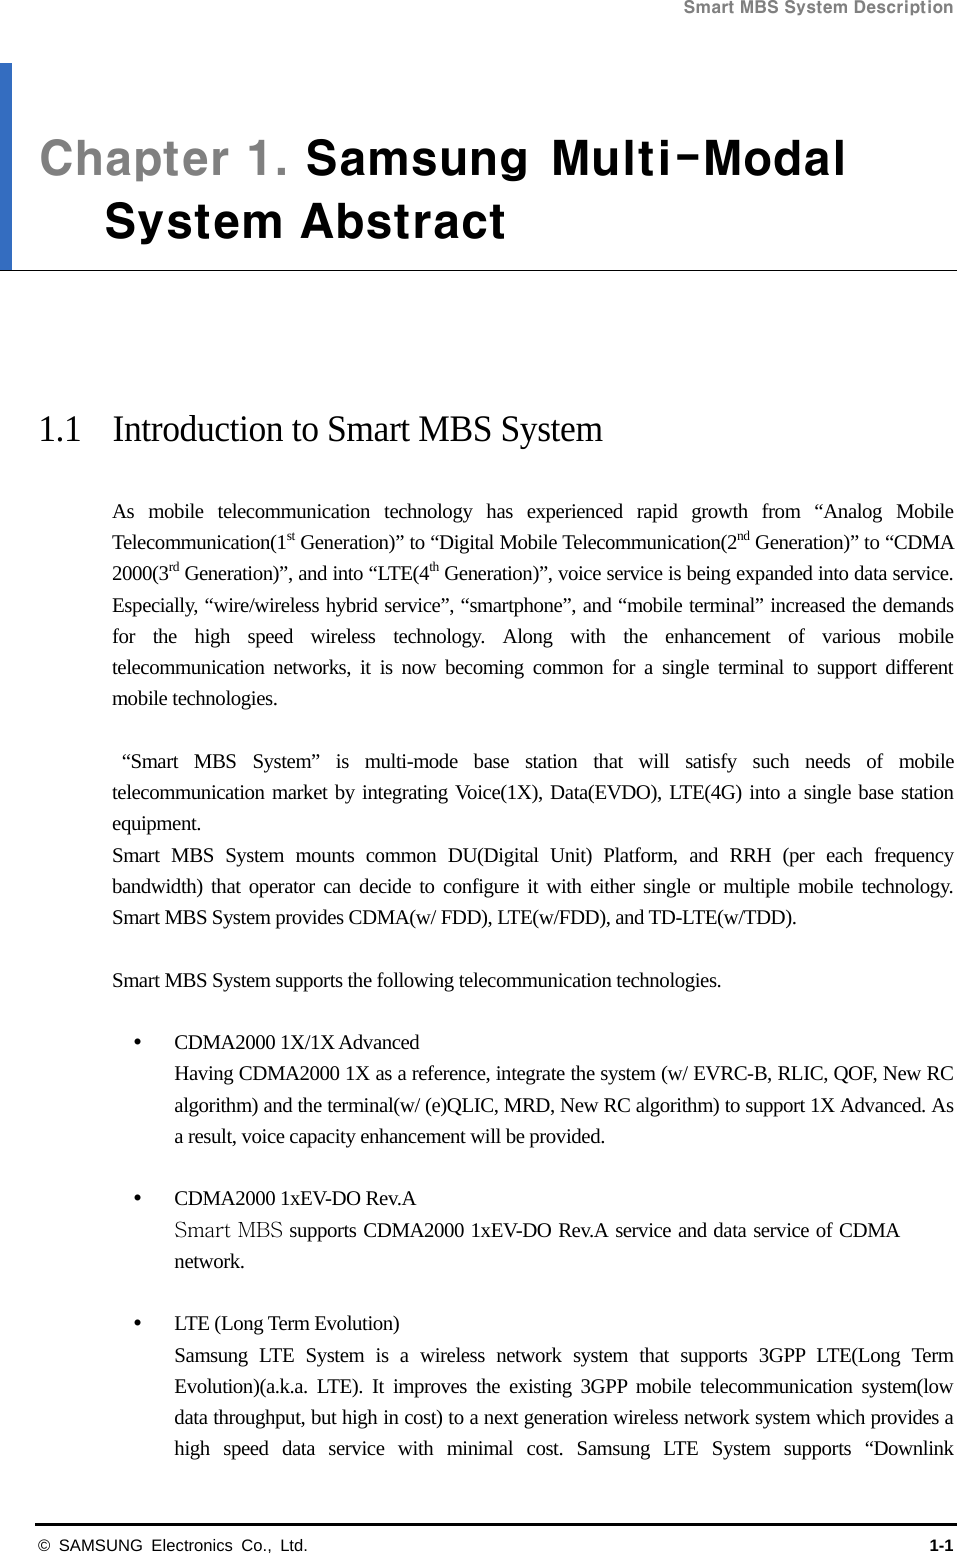 Smart MBS System Description   © SAMSUNG Electronics Co., Ltd.  1-1 Chapter 1. Samsung  Multi-ModalSystem Abstract     1.1  Introduction to Smart MBS System  As mobile telecommunication technology has experienced rapid growth from “Analog Mobile Telecommunication(1st Generation)” to “Digital Mobile Telecommunication(2nd Generation)” to “CDMA 2000(3rd Generation)”, and into “LTE(4th Generation)”, voice service is being expanded into data service. Especially, “wire/wireless hybrid service”, “smartphone”, and “mobile terminal” increased the demands for the high speed wireless technology. Along with the enhancement of various mobile telecommunication networks, it is now becoming common for a single terminal to support different mobile technologies.   “Smart MBS System” is multi-mode base station that will satisfy such needs of mobile telecommunication market by integrating Voice(1X), Data(EVDO), LTE(4G) into a single base station equipment. Smart MBS System mounts common DU(Digital Unit) Platform, and RRH (per each frequency bandwidth) that operator can decide to configure it with either single or multiple mobile technology. Smart MBS System provides CDMA(w/ FDD), LTE(w/FDD), and TD-LTE(w/TDD).    Smart MBS System supports the following telecommunication technologies.   CDMA2000 1X/1X Advanced Having CDMA2000 1X as a reference, integrate the system (w/ EVRC-B, RLIC, QOF, New RC algorithm) and the terminal(w/ (e)QLIC, MRD, New RC algorithm) to support 1X Advanced. As a result, voice capacity enhancement will be provided.   CDMA2000 1xEV-DO Rev.A Smart MBS supports CDMA2000 1xEV-DO Rev.A service and data service of CDMA network.    LTE (Long Term Evolution) Samsung LTE System is a wireless network system that supports 3GPP LTE(Long Term Evolution)(a.k.a. LTE). It improves the existing 3GPP mobile telecommunication system(low data throughput, but high in cost) to a next generation wireless network system which provides a high speed data service with minimal cost. Samsung LTE System supports “Downlink 